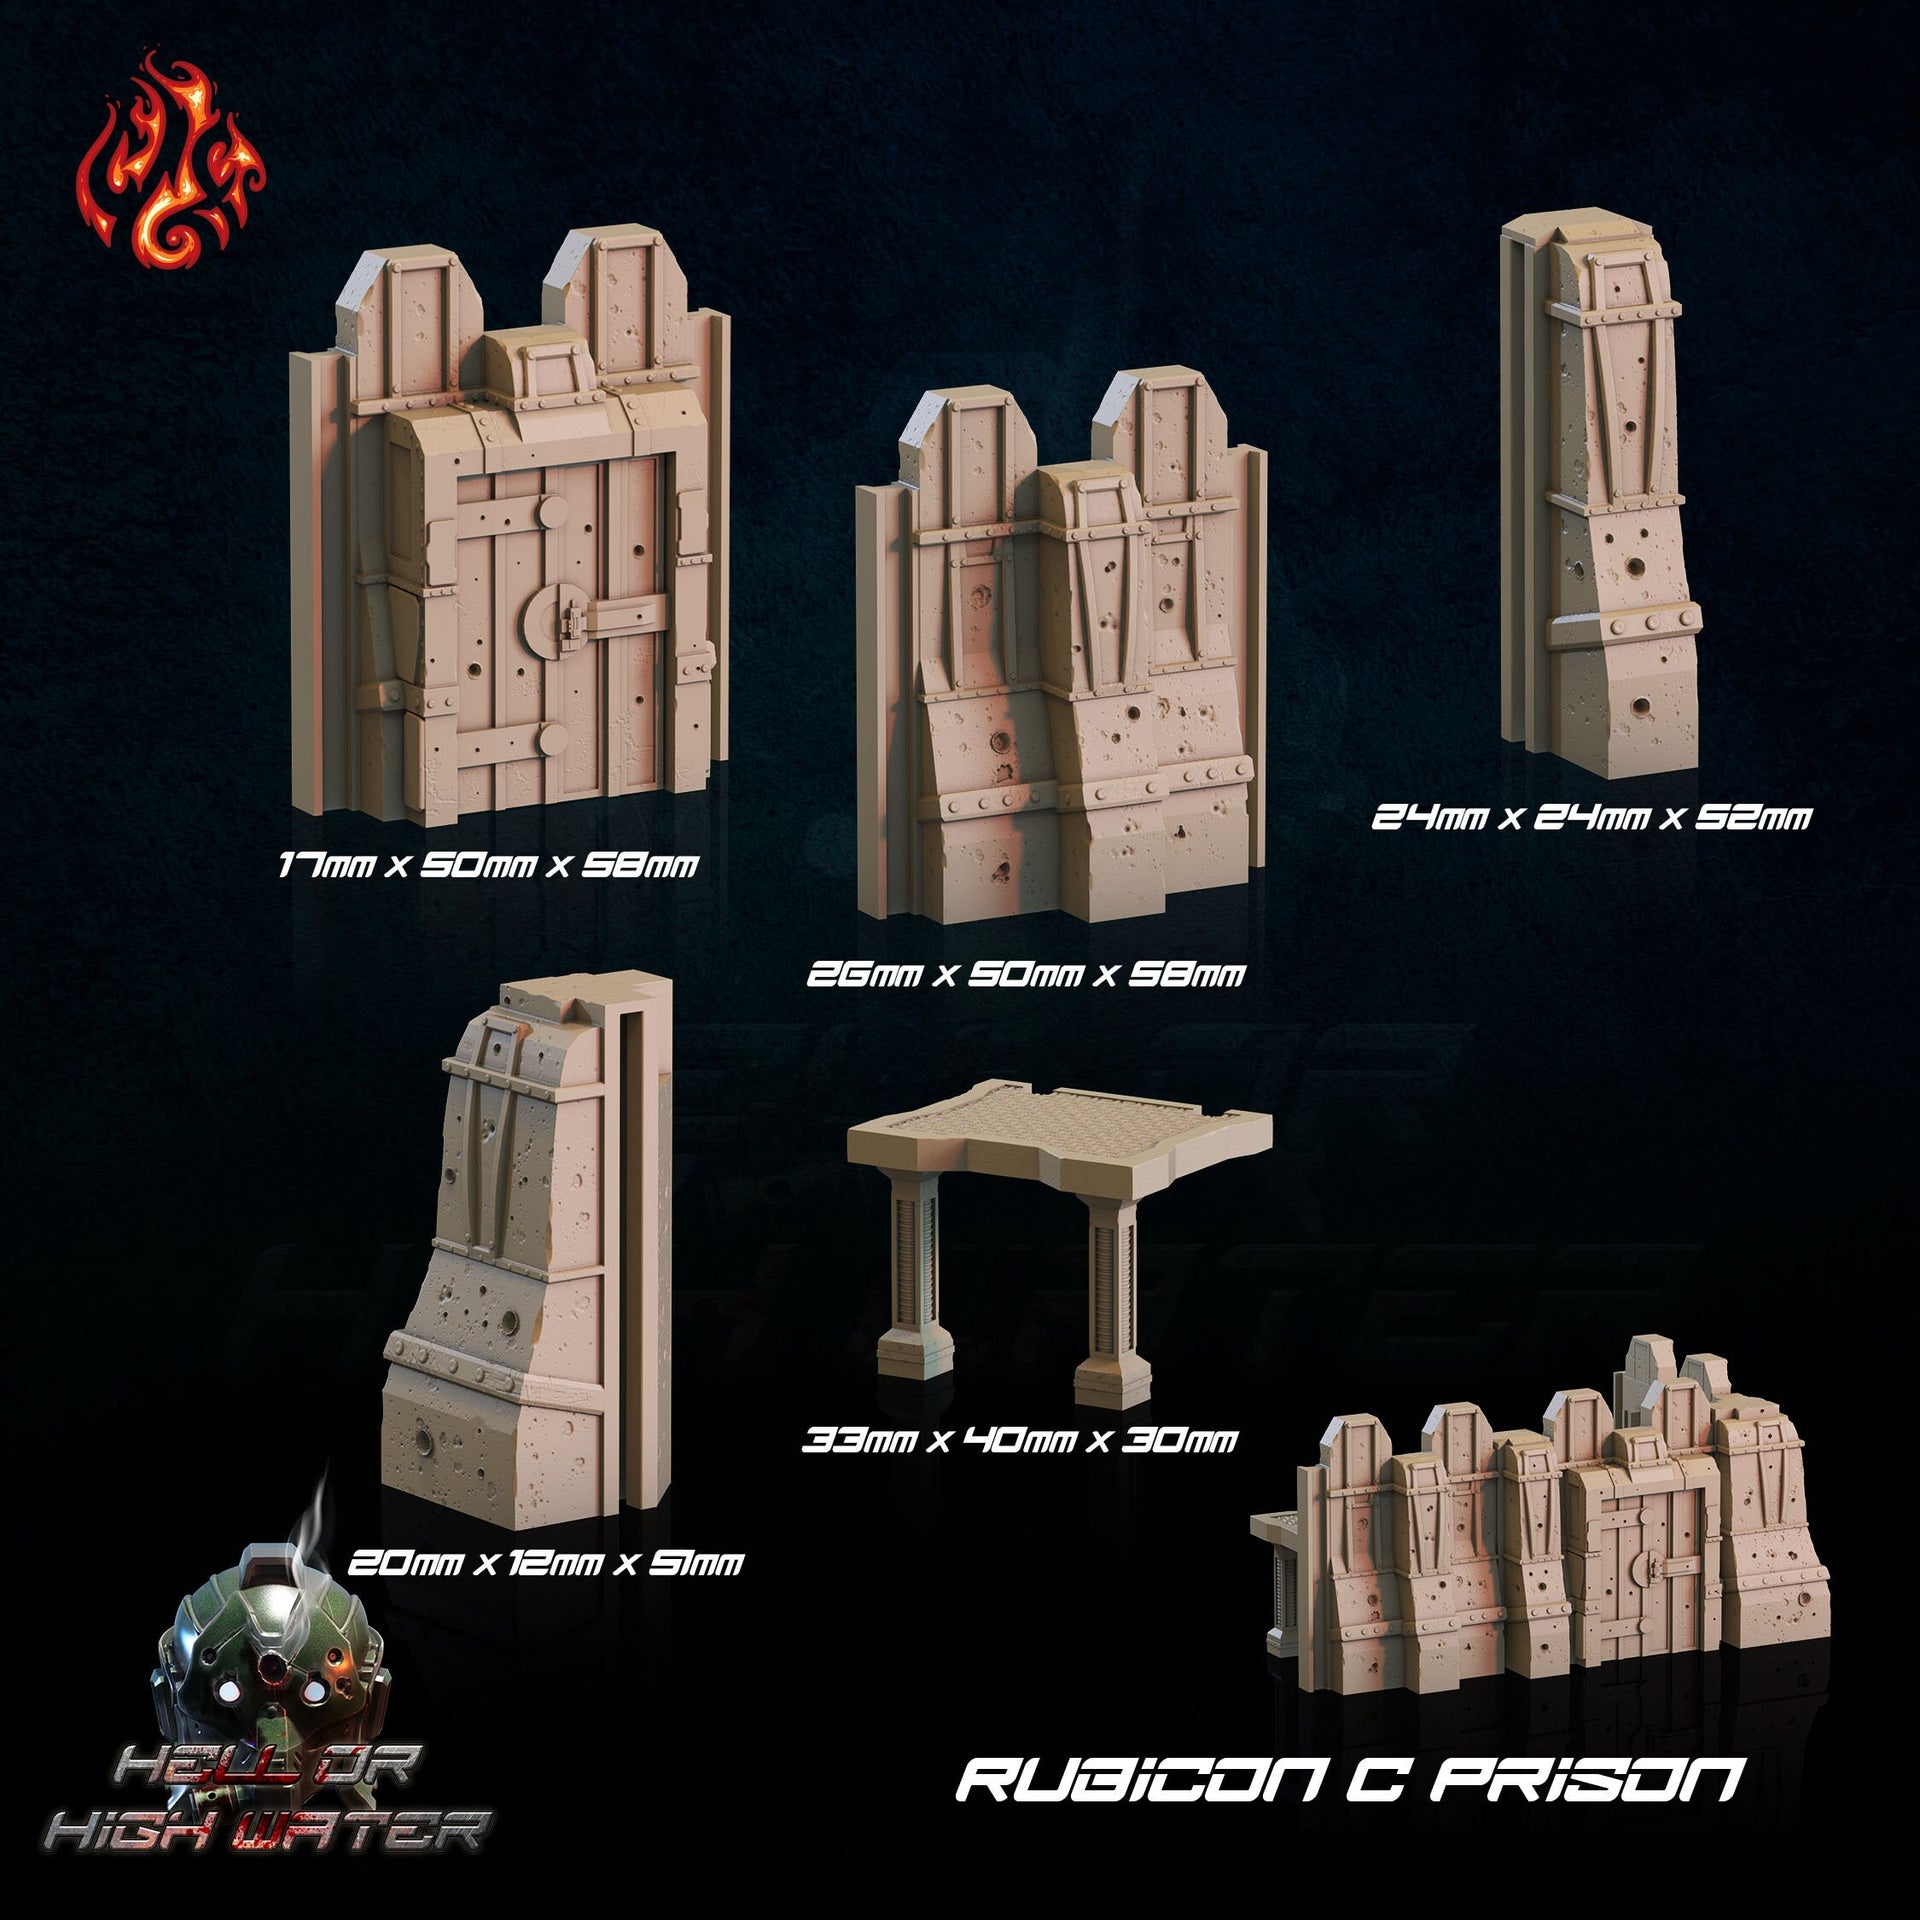 Rubicon C Prison, Modular Fortress Walls and Towers - Crippled God Foundry - Hell or High Water | 32mm | Scifi | Modular | Filament